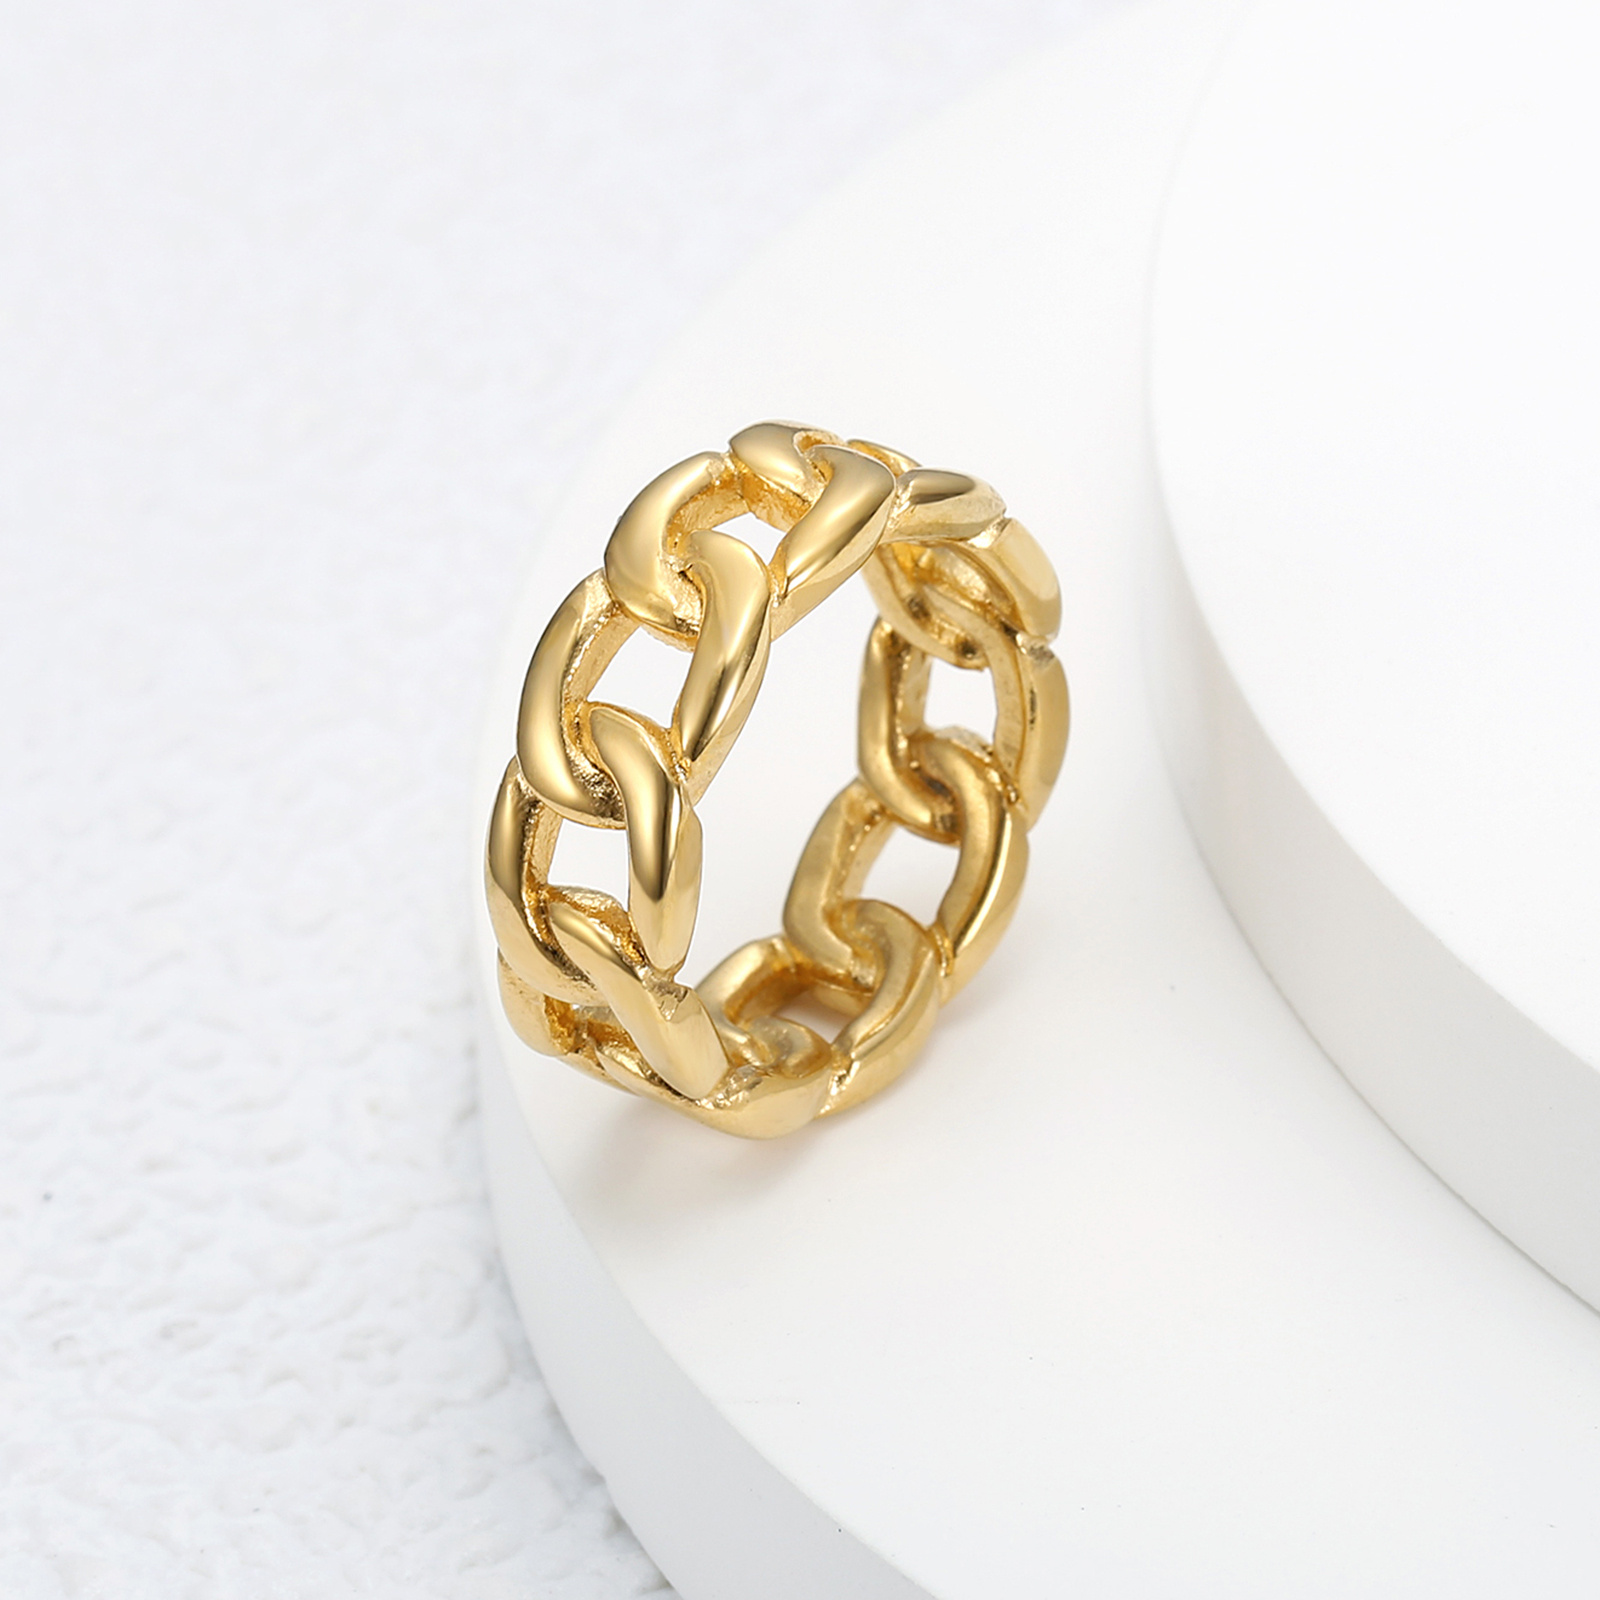 Chain Ring in Gold 6